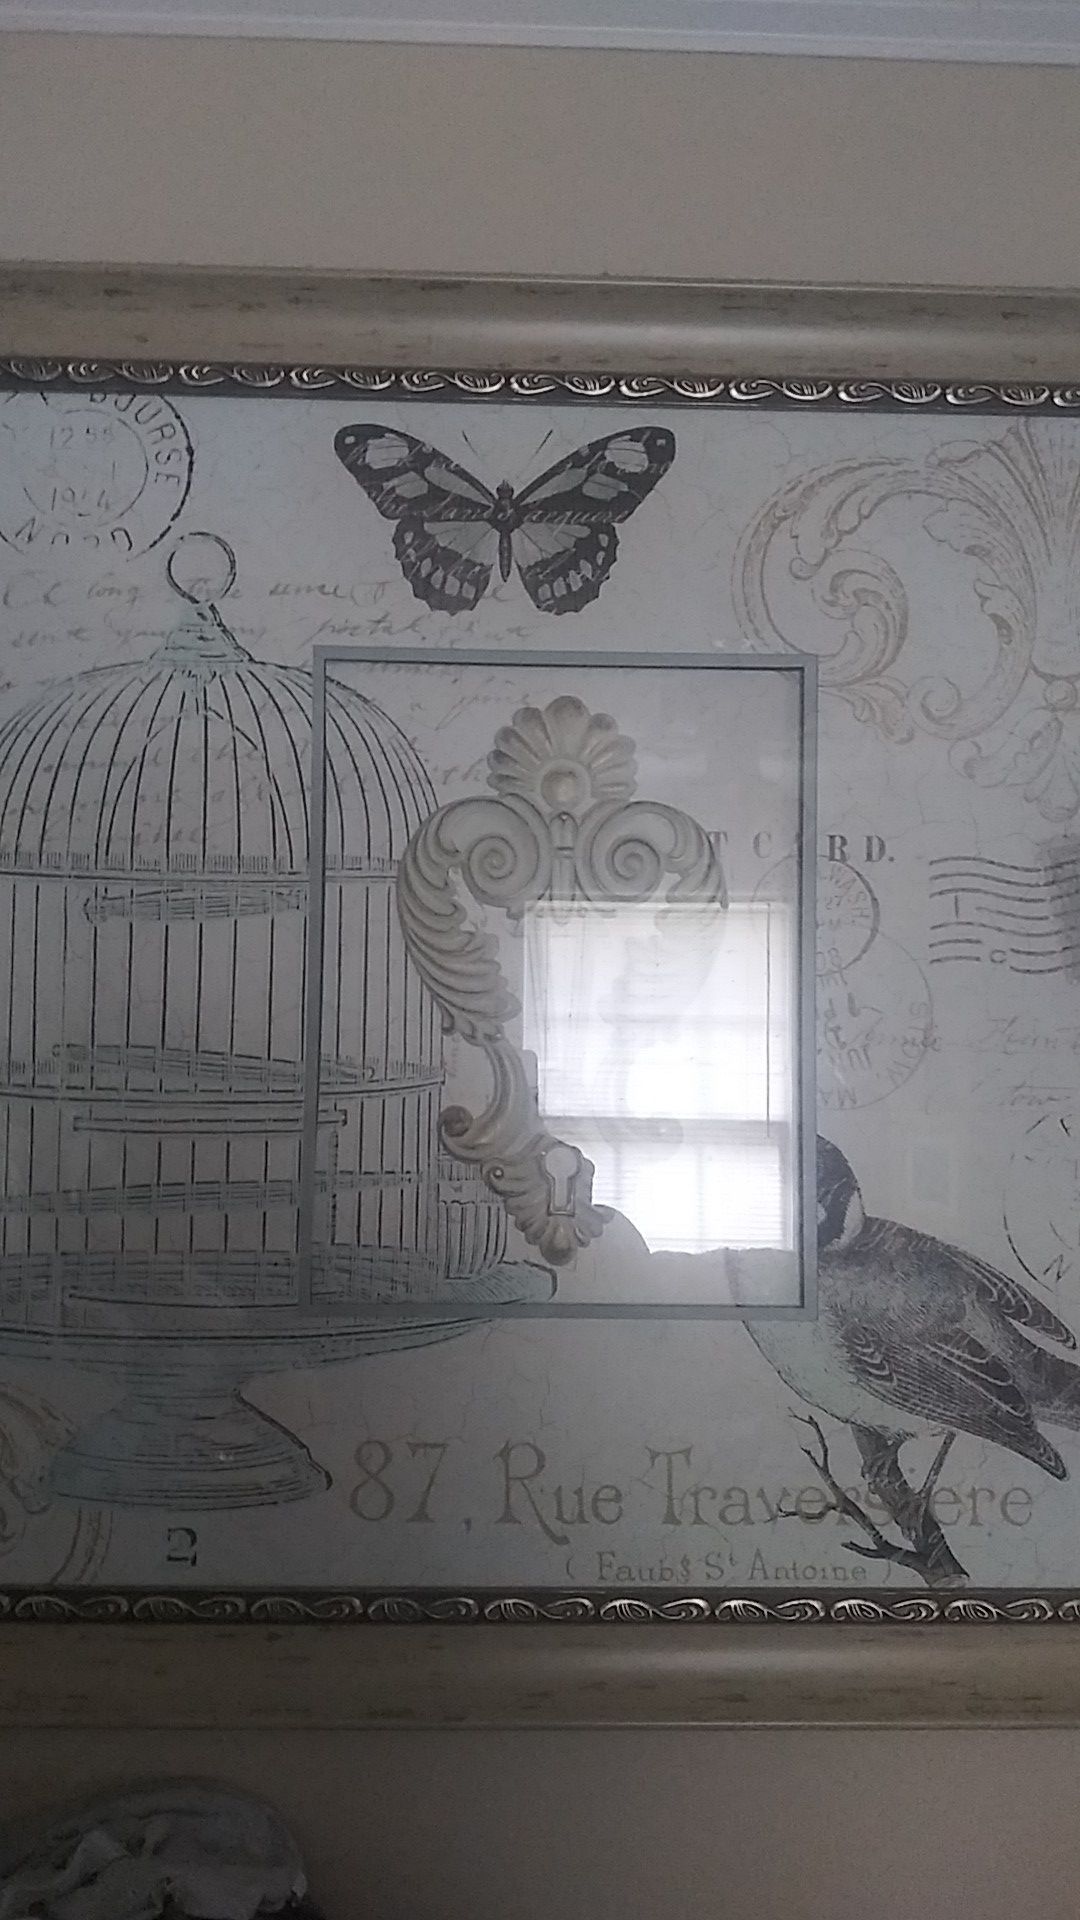 Bird Cage Picture Glass Framing/ 87, RueTracerstere. (Faub S. Antine